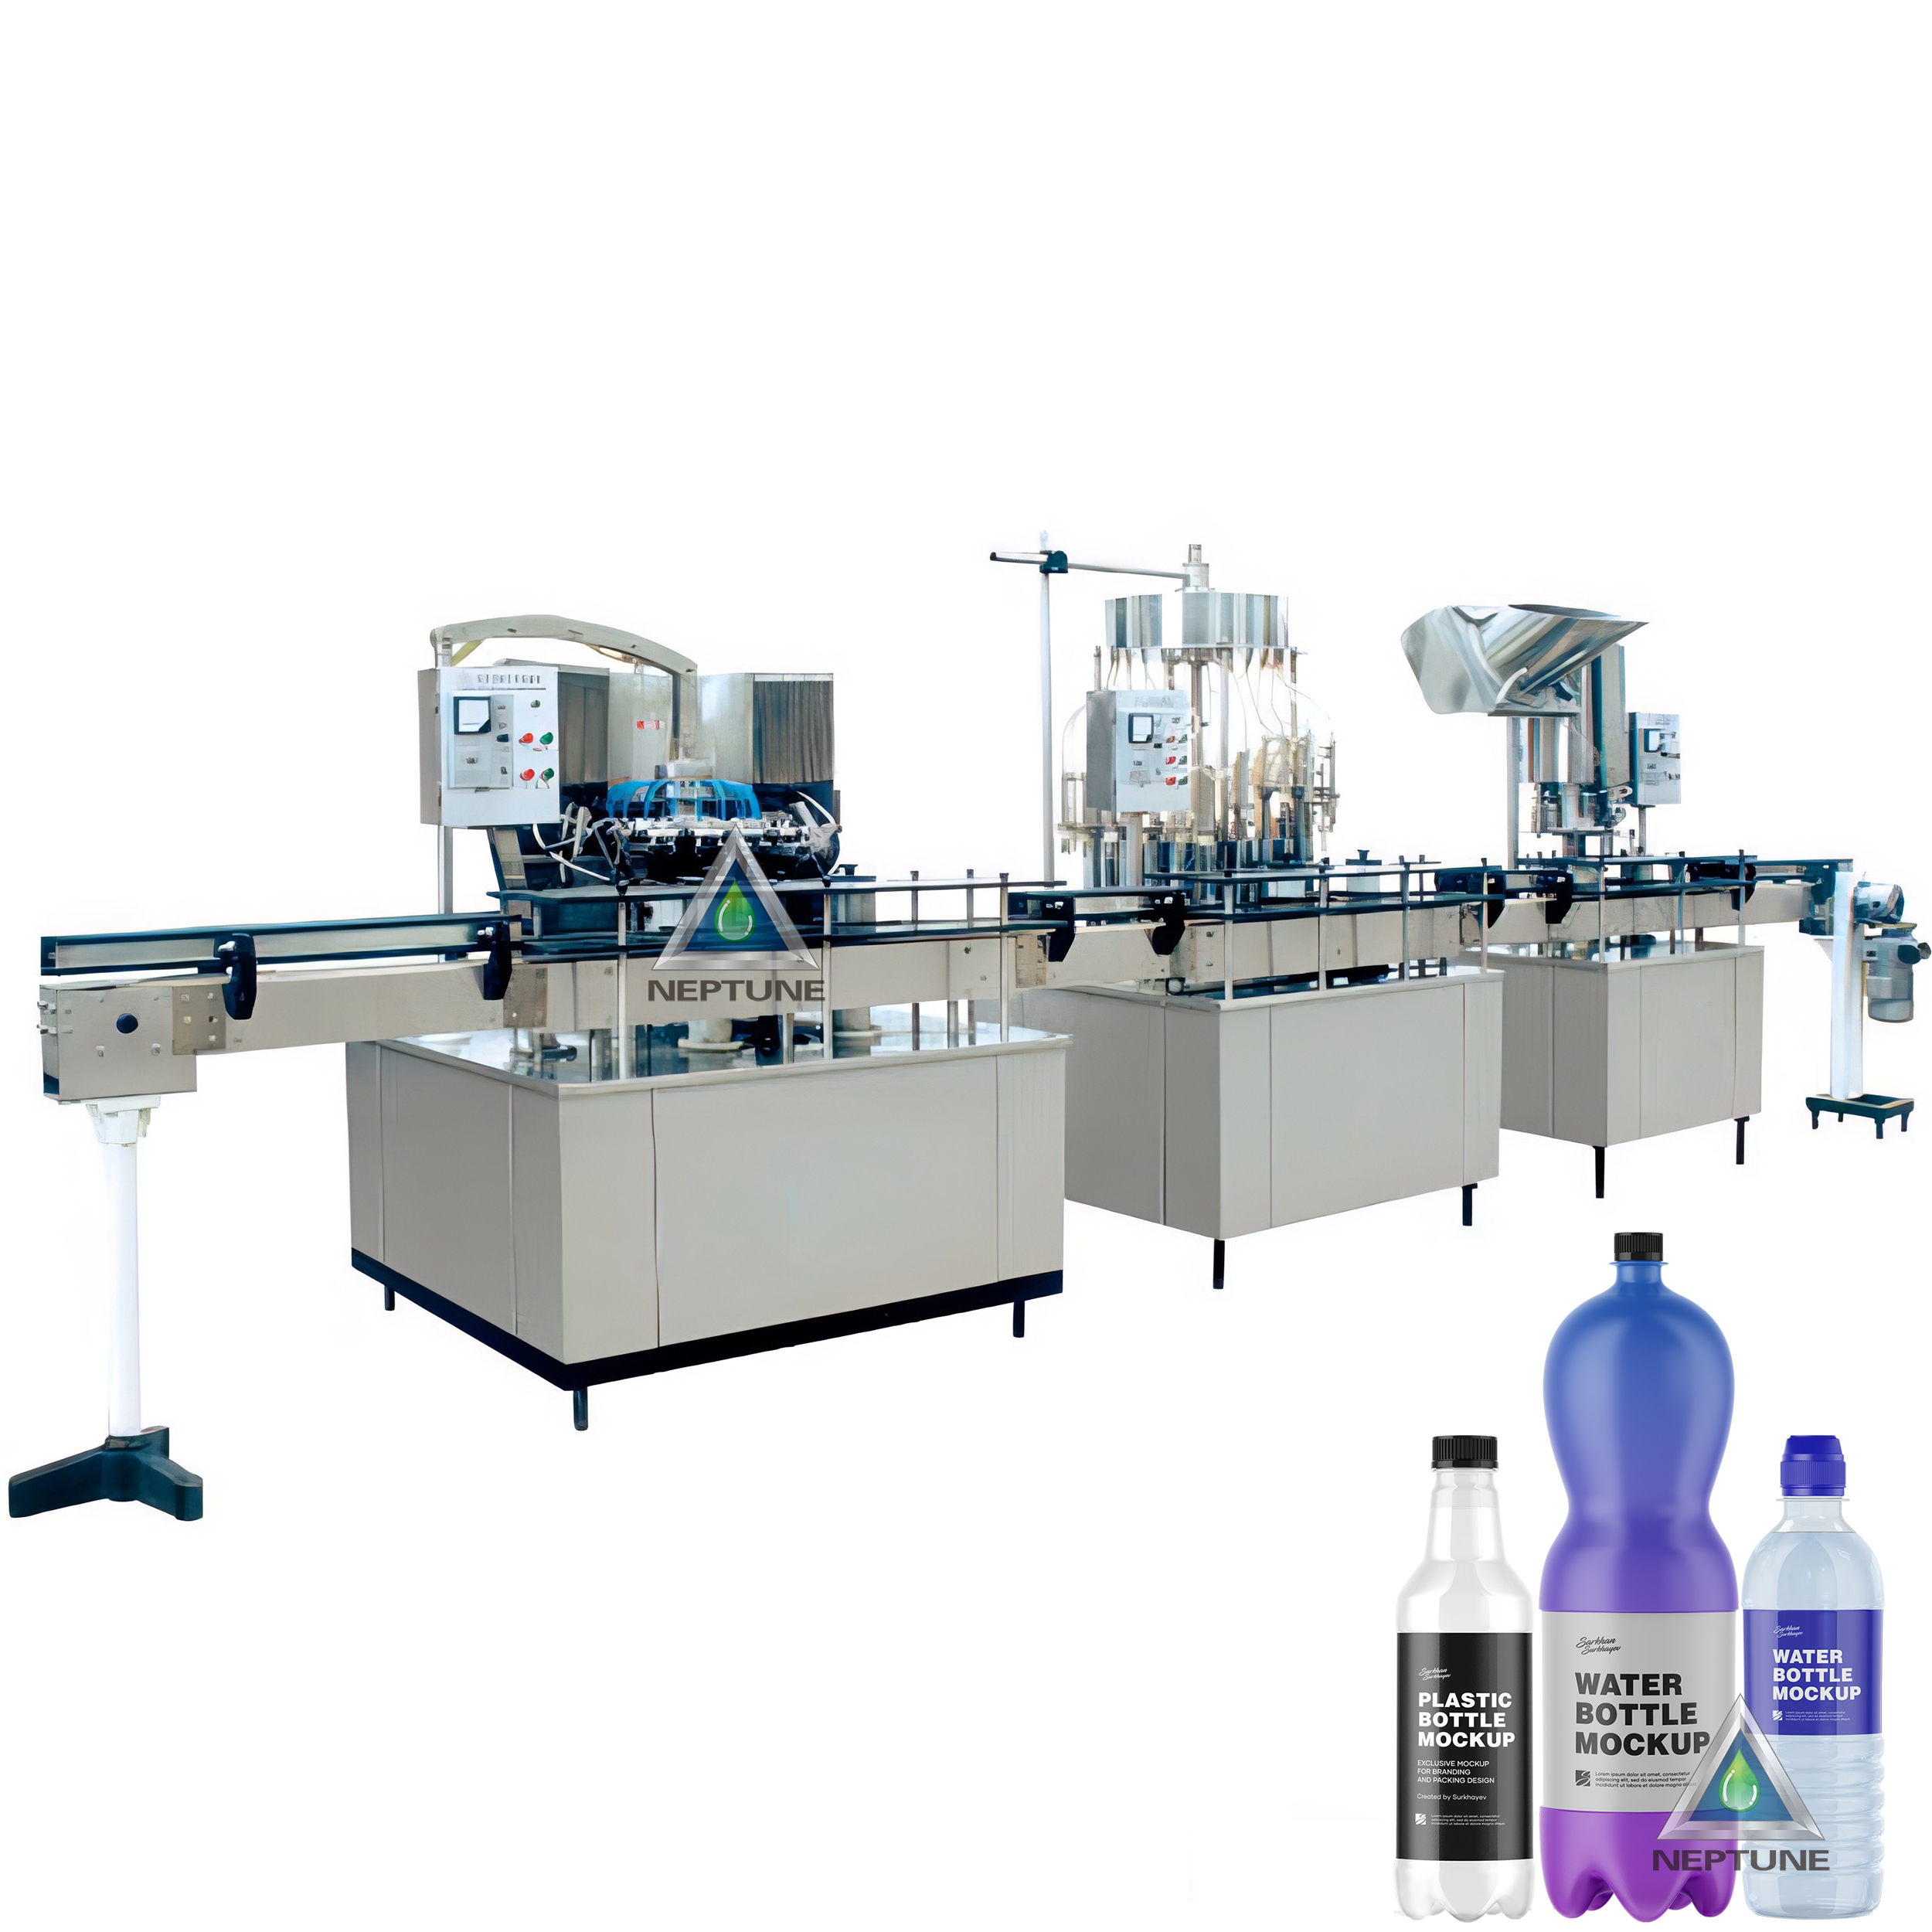 4in1 semi automatic water bottling machine line included auto rinser filler and capper with a semi labler. 